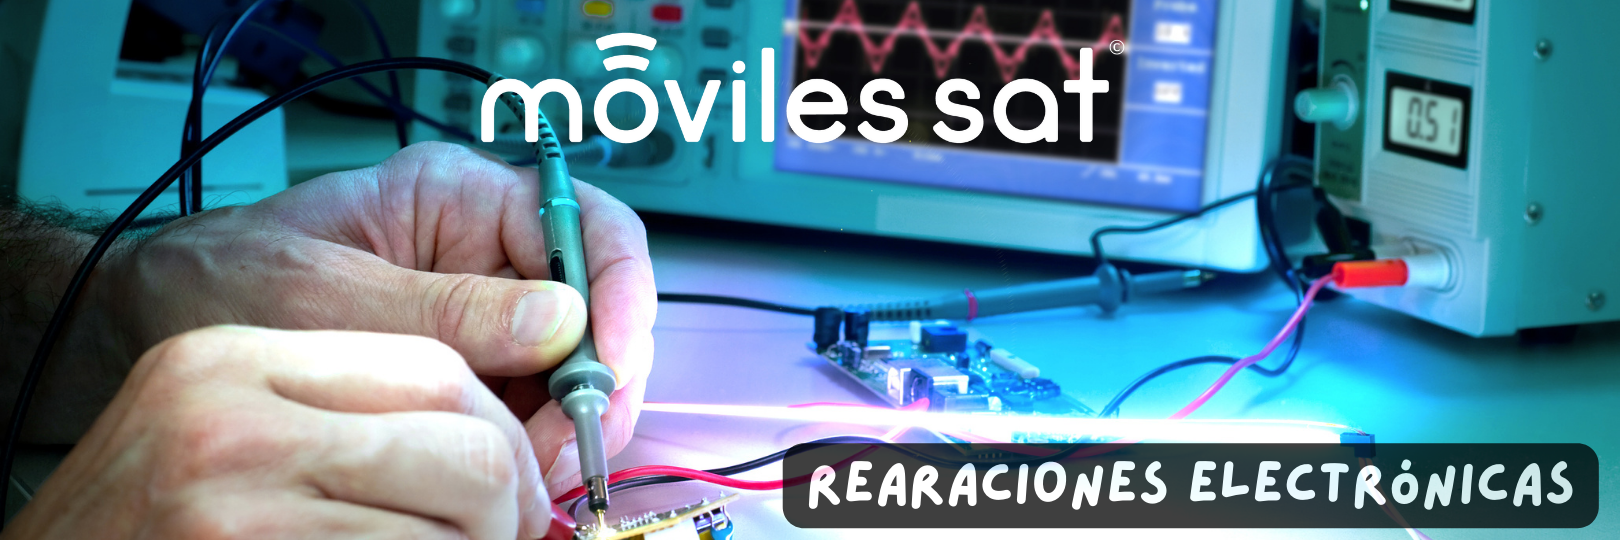 TALLER MOVIL CONTRACTOR